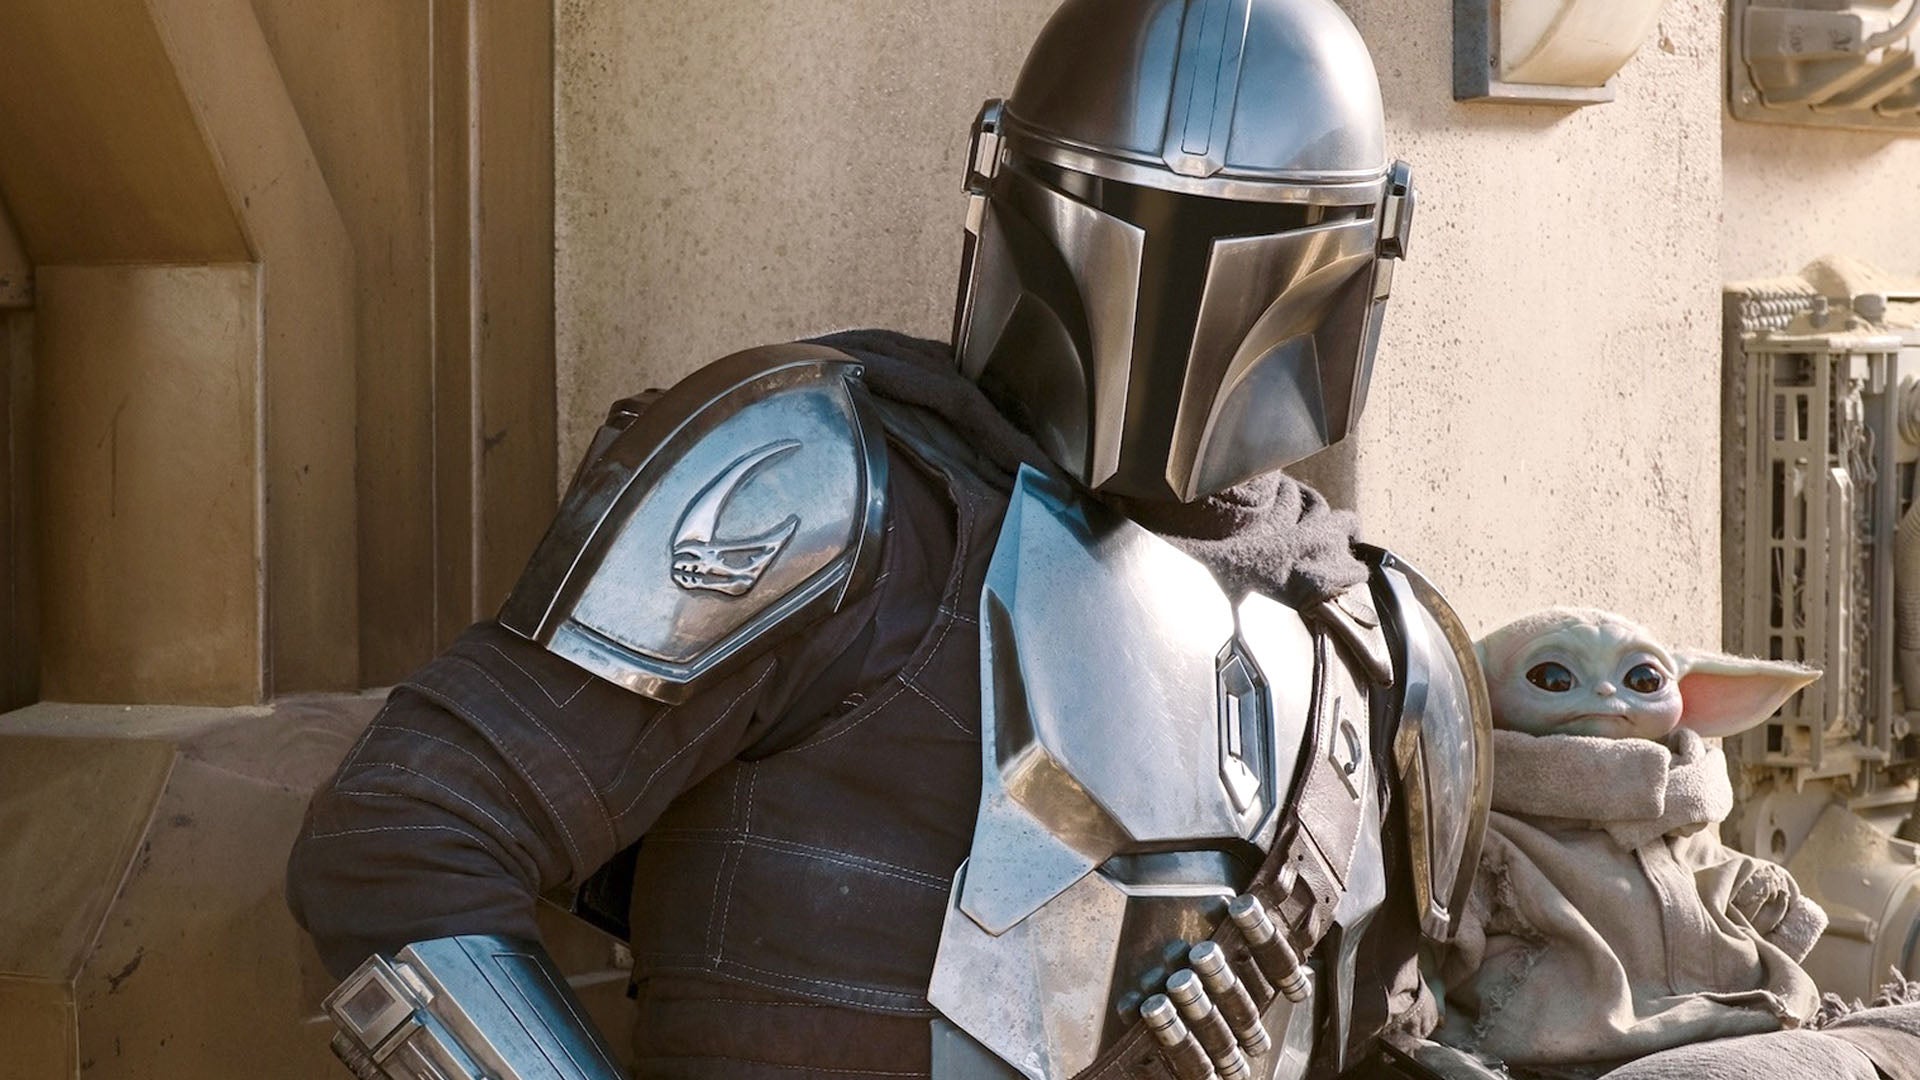 The Mandalorian exclusive: First look at season 2